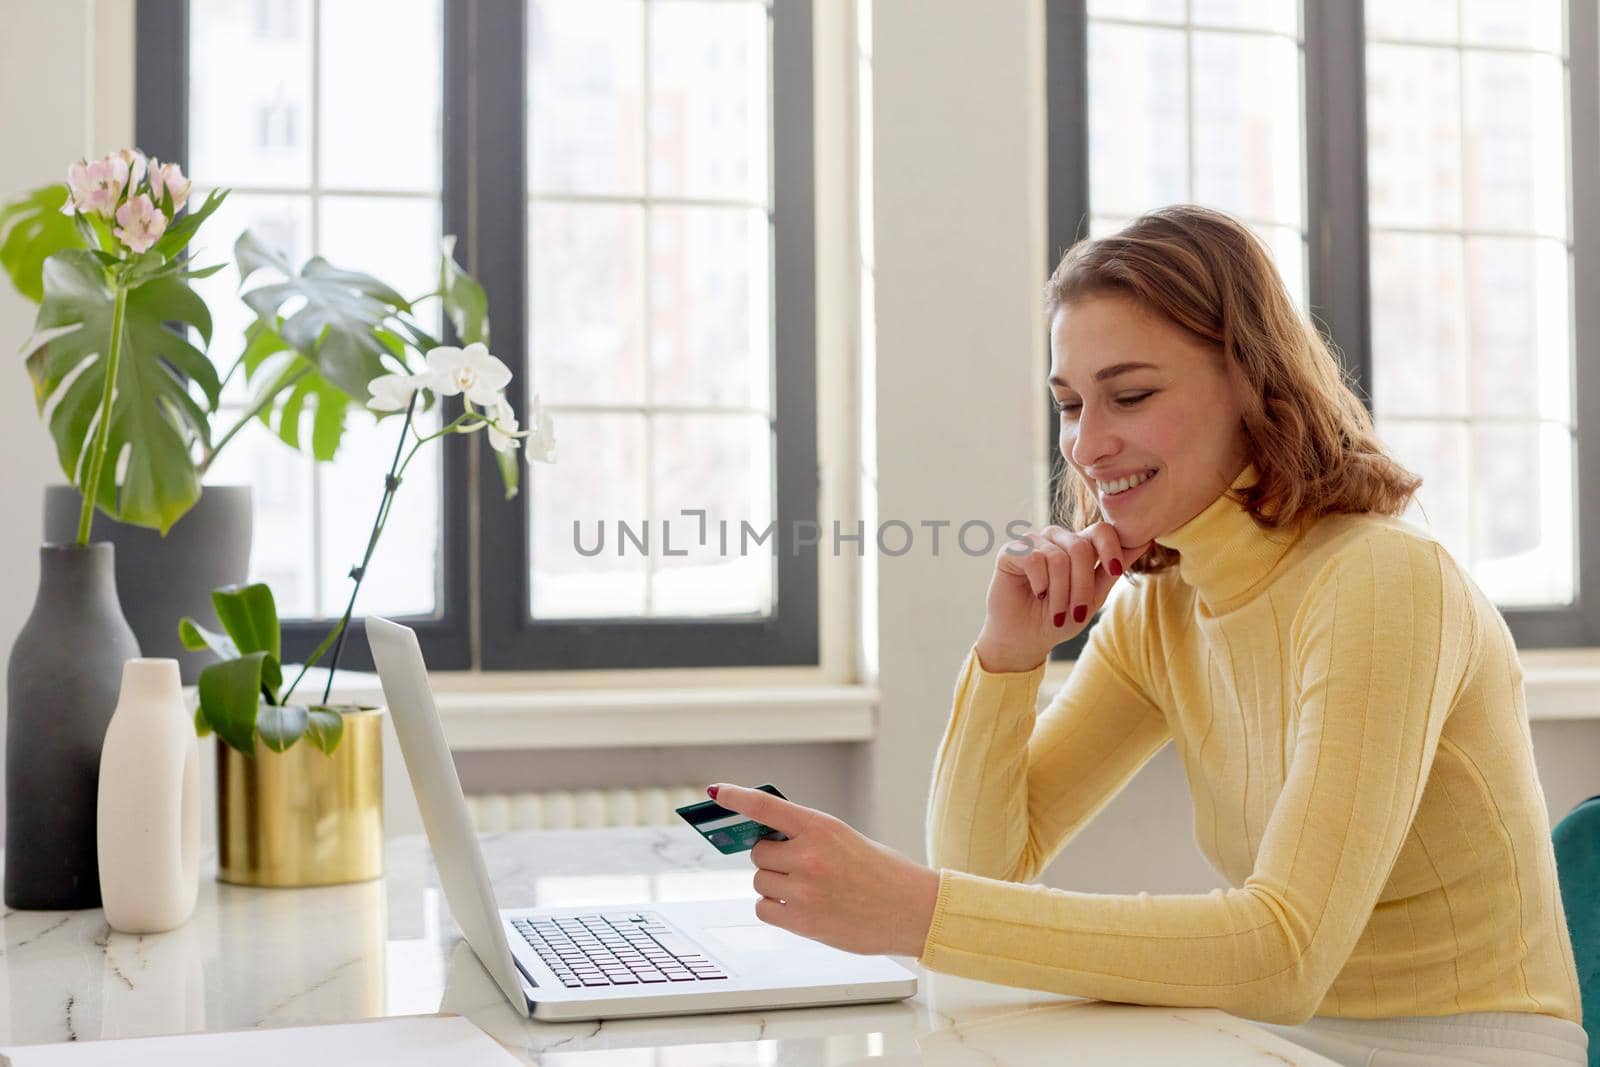 Young woman holding credit card and using laptop computer. Businesswoman or entrepreneur working at home. Online shopping, e-commerce, internet banking, spending money, working from home concept